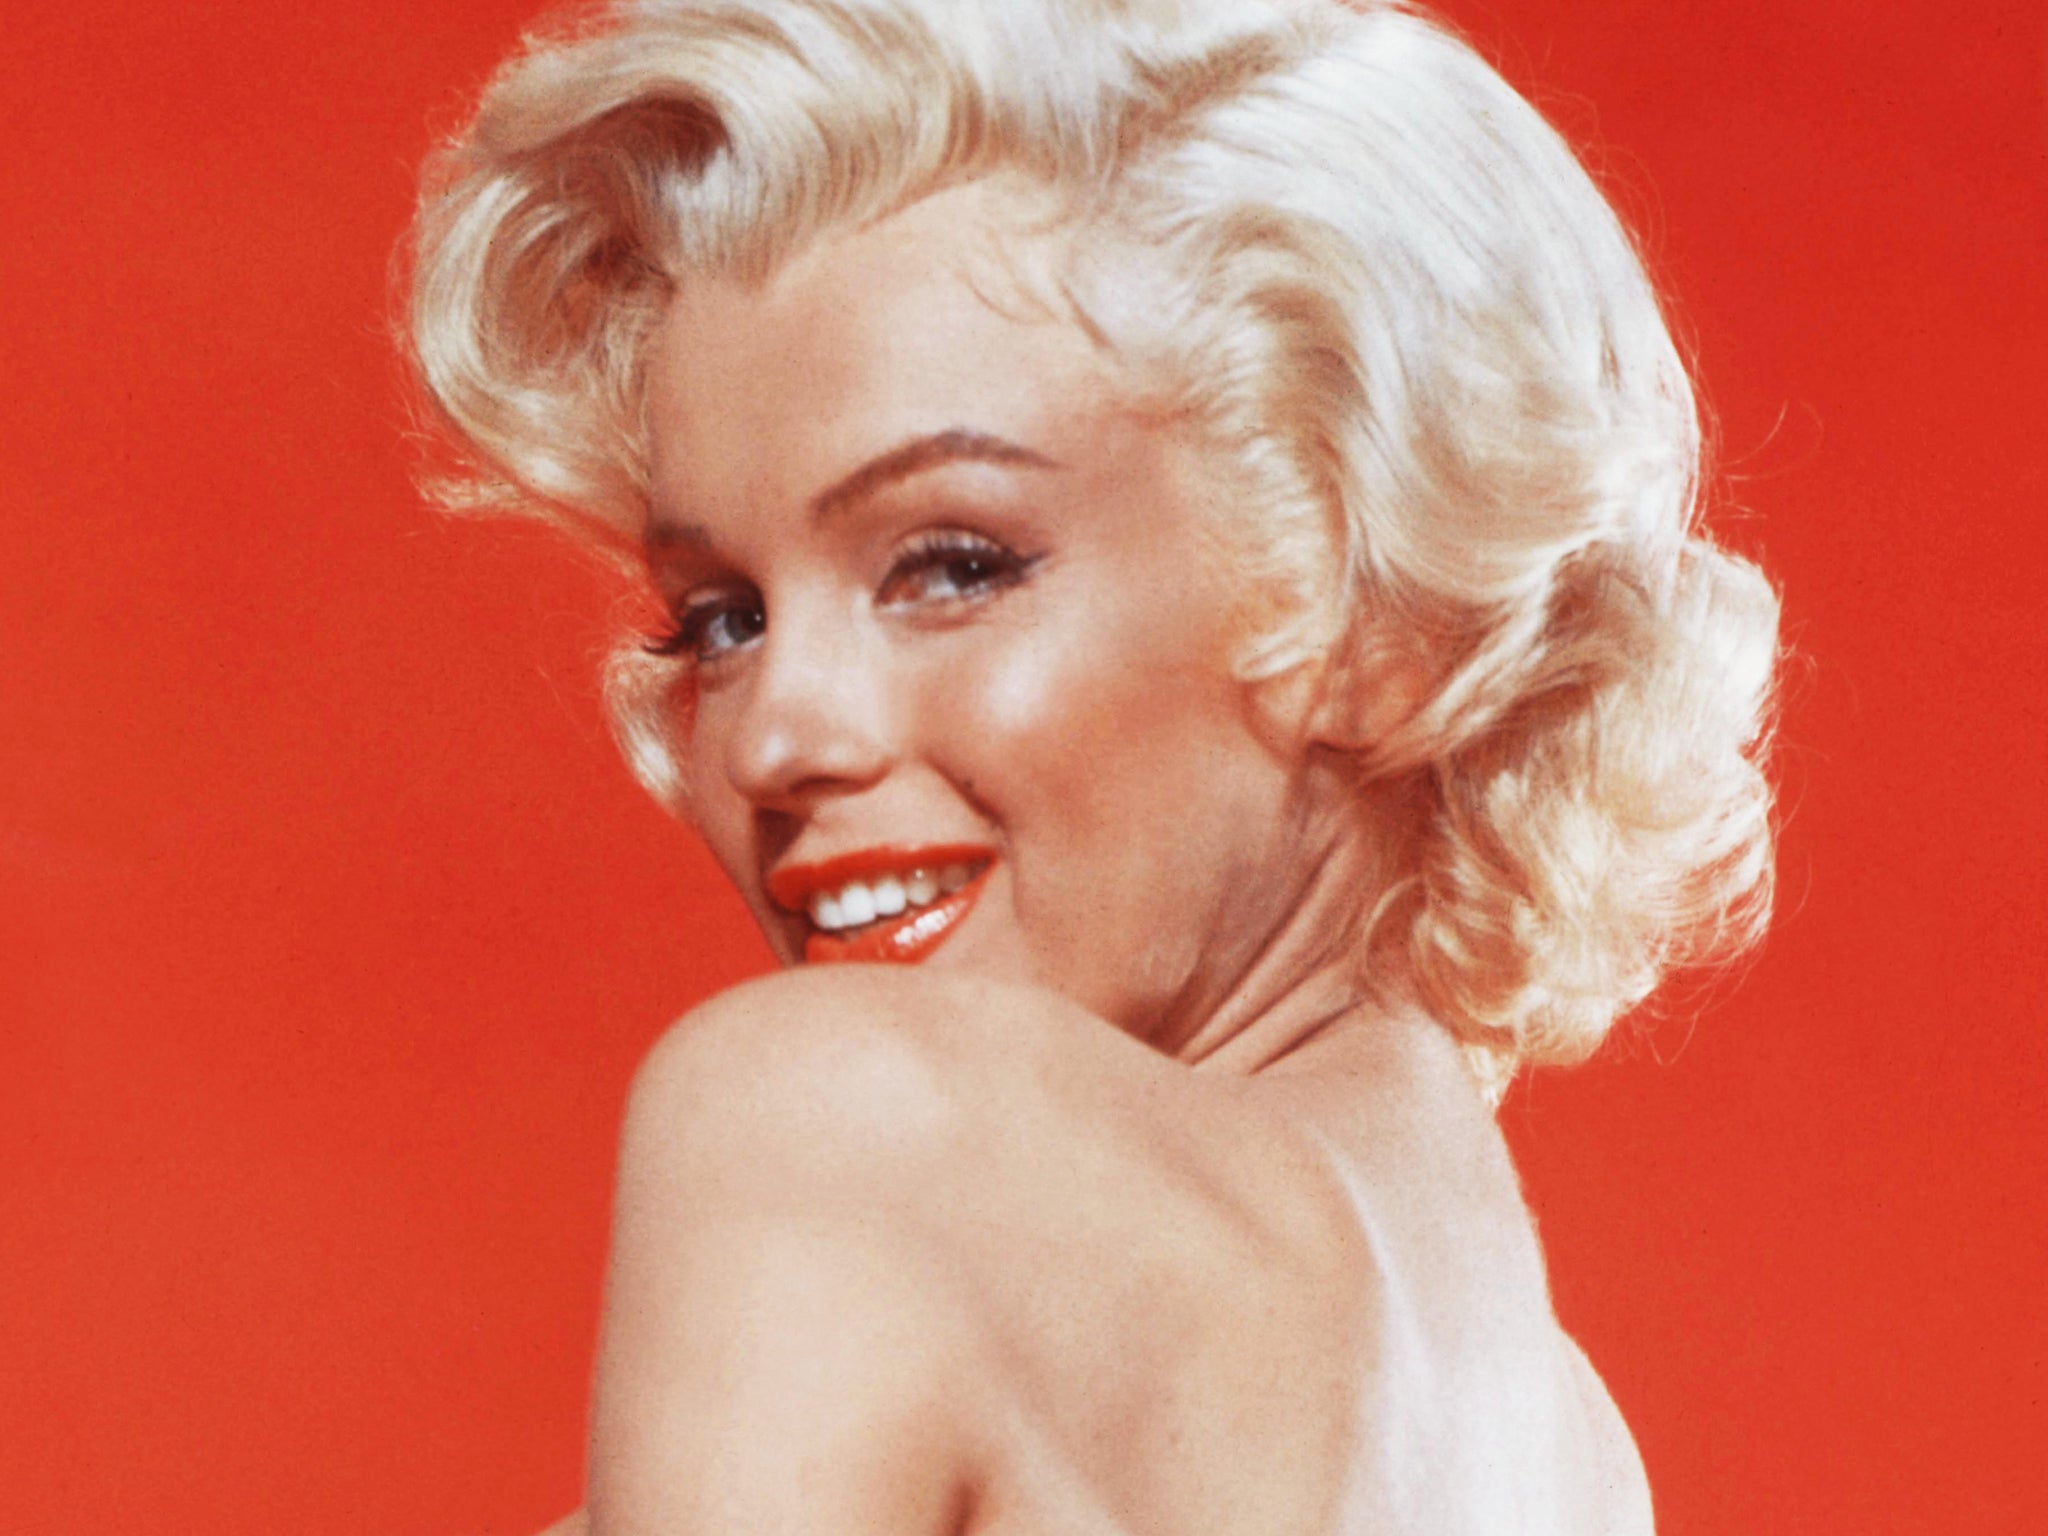 ‘When the camera went on, she just came to life’: Monroe in 1953